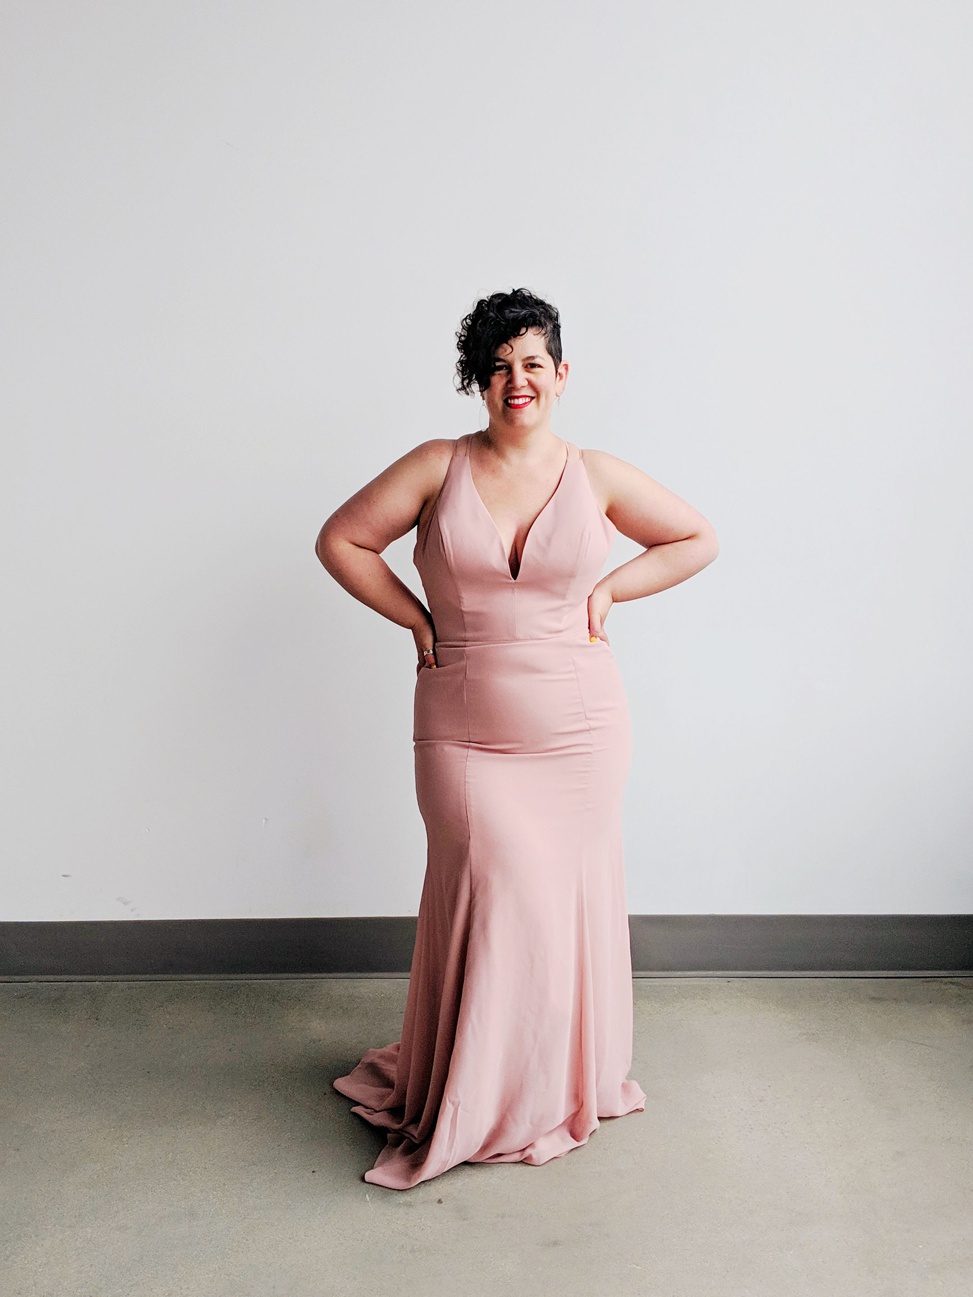 Another view of a woman wearing a Brideside Aura line bridesmaid dress